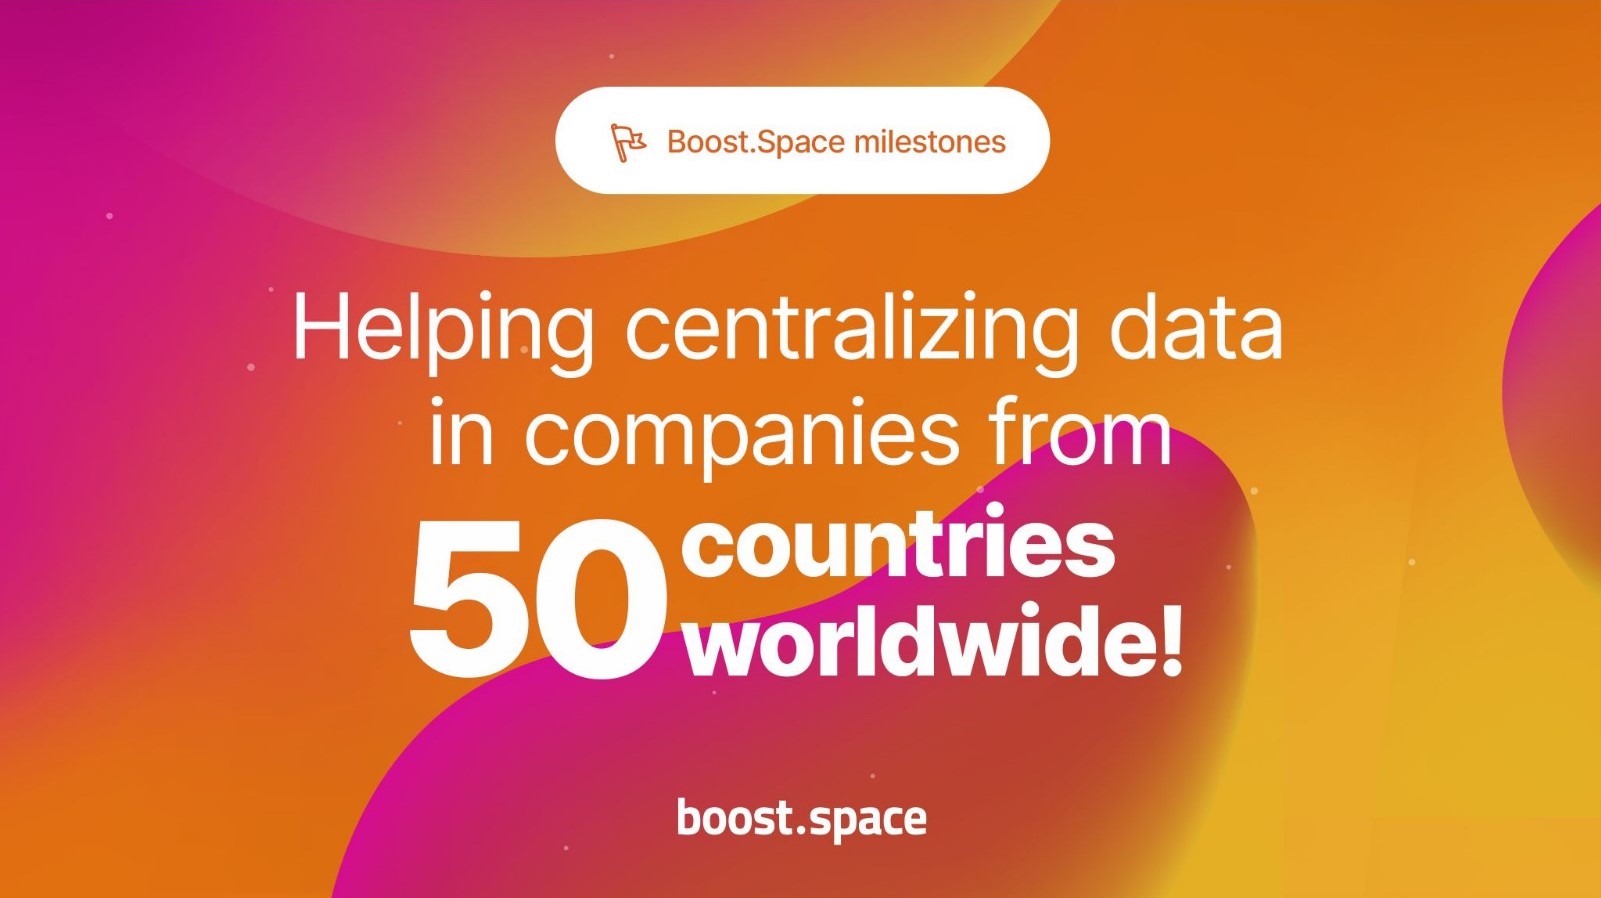 Boost.space in companies from 50 countries worldwide